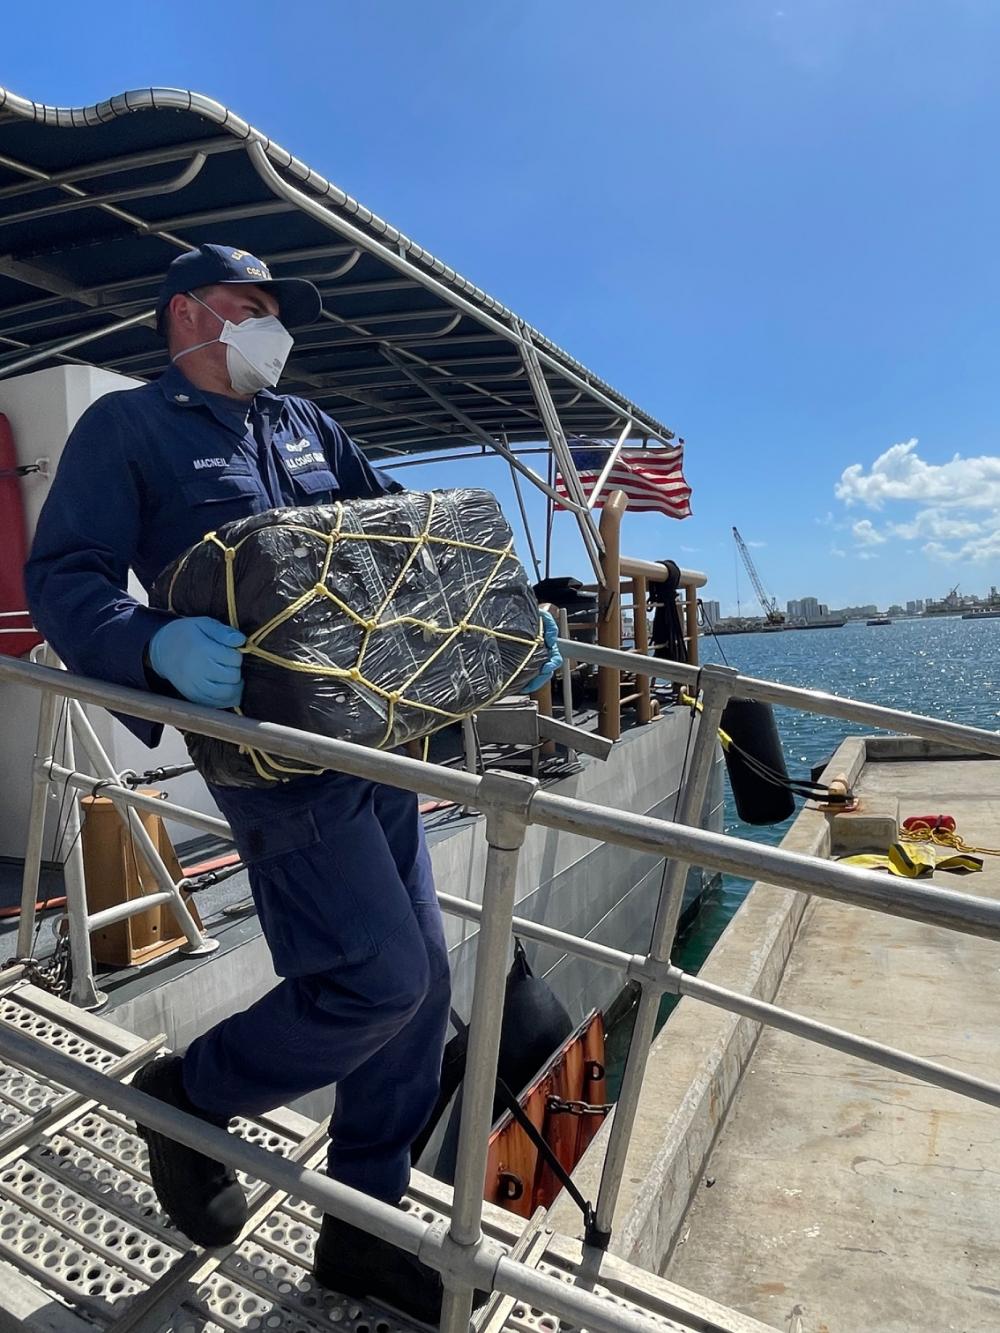 A Coast Guard Cutter Donald Horsley crewmember helps offload approximately 1,000 kilograms of seized cocaine, valued at $20 million dollars, at Coast Guard Base San Juan April 4, 2022, following the interdiction of a go-fast vessel in the Caribbean Sea March 30, 2022 near Puerto Rico. Drug Enforcement Administration Special Agents received custody of two suspected smugglers and the seized contraband. This interdiction is the result of multi-agency efforts involving the Caribbean Border Interagency Group and the Caribbean Corridor Strike Force. (U.S. Coast Guard photo)